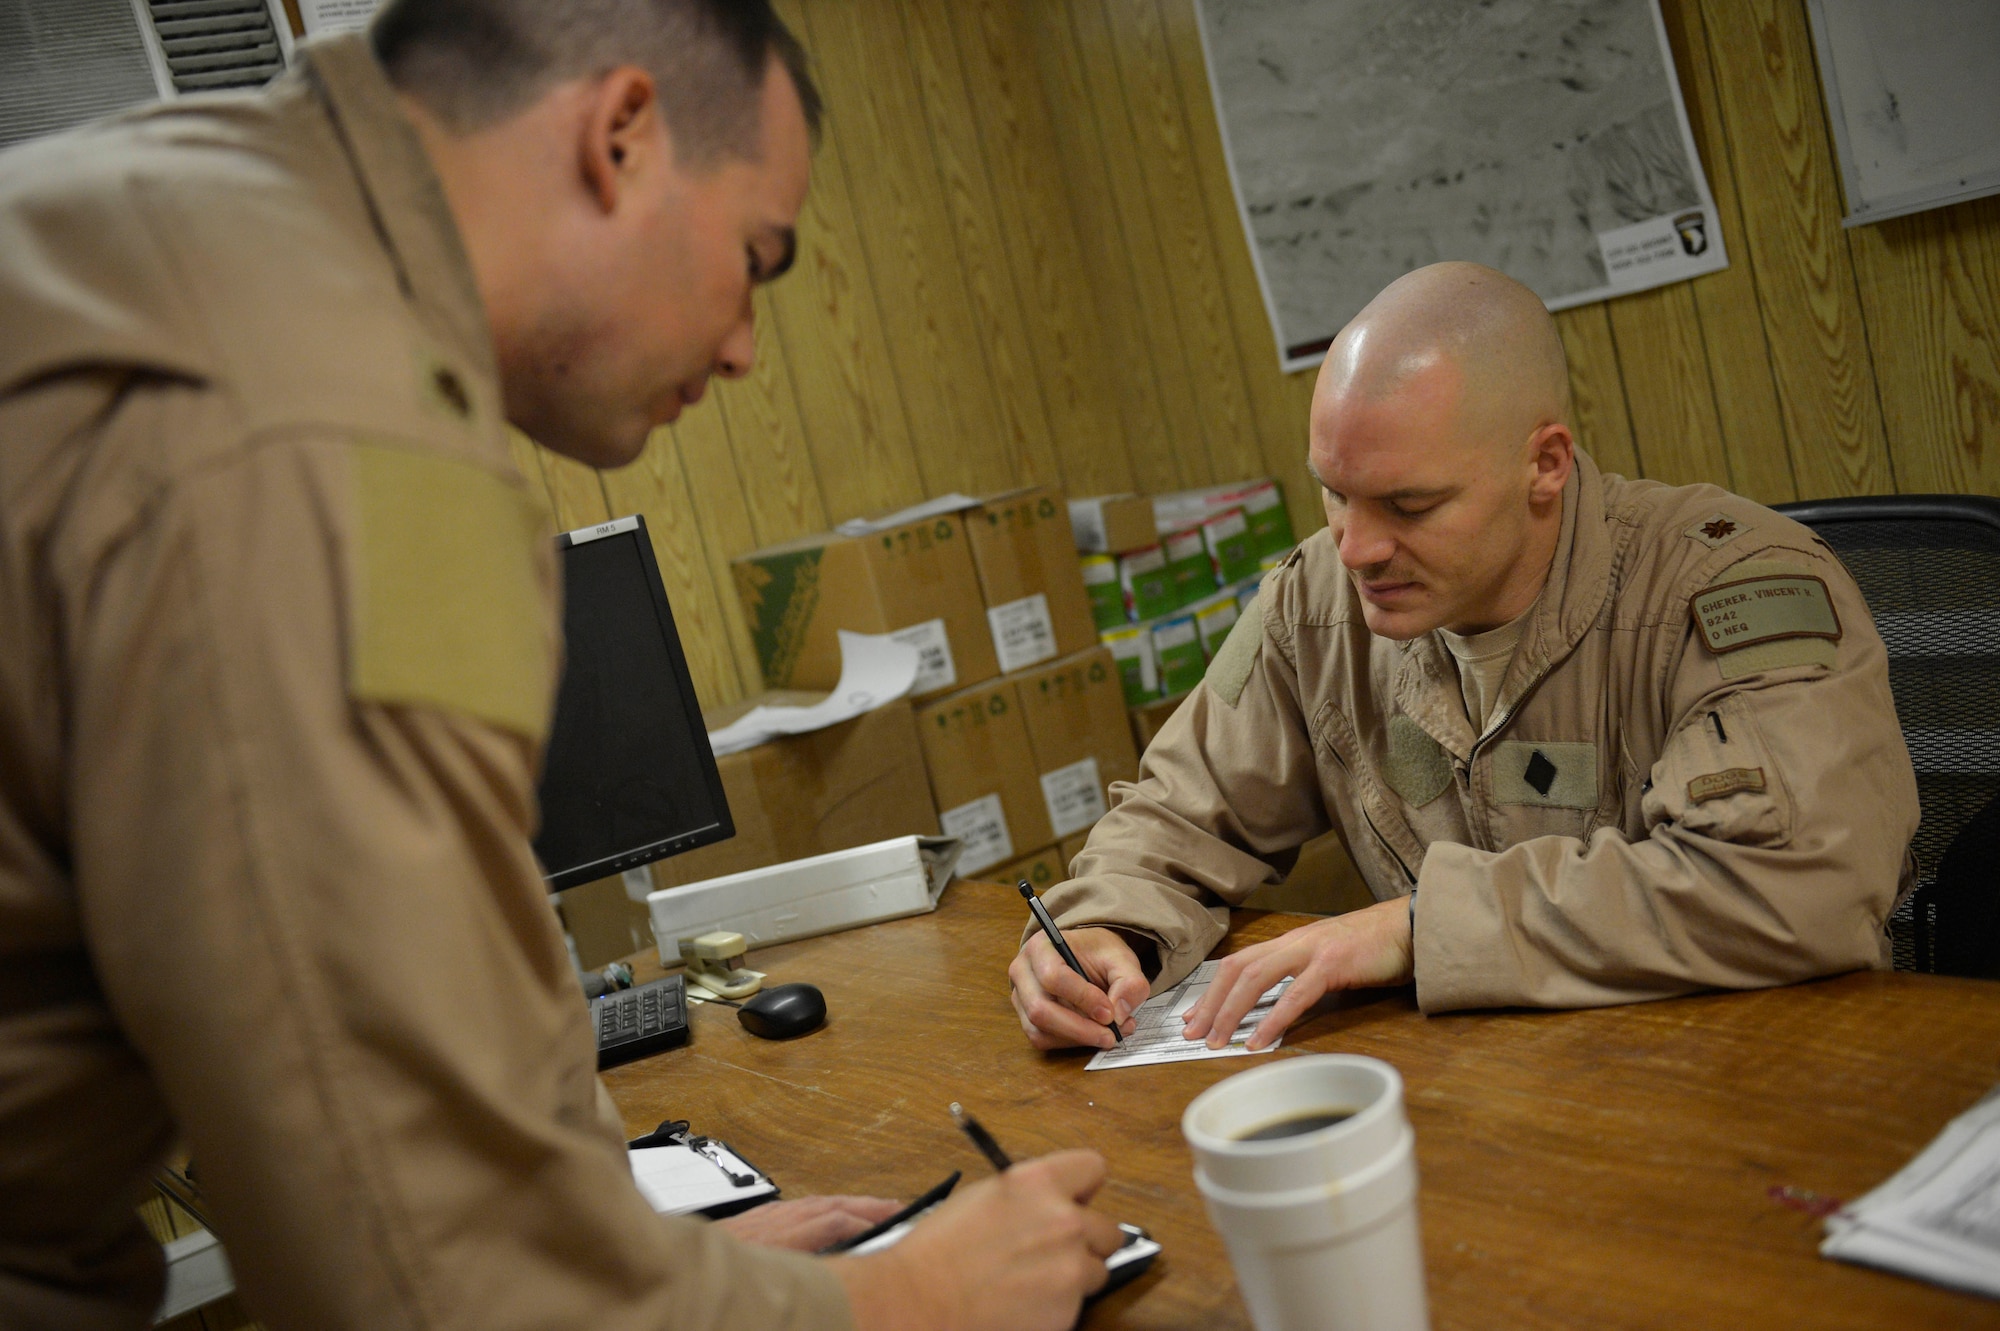 (Right) U.S. Air Force Maj. Vincent Sherer, 455th Ai r Expeditionary Wing, A-10 Thunderbolt II pilot, reviews checklists before a sortie at Bagram Airfield, Afghanistan Aug. 5, 2014.  Sherer has been flying for 12 years and has deployed to Bagram four times.  He is deployed from Davis-Monthan Air Force Base, Ariz. and a native of Portland, Ore. (U.S. Air Force photo by Staff Sgt. Evelyn Chavez/Released)